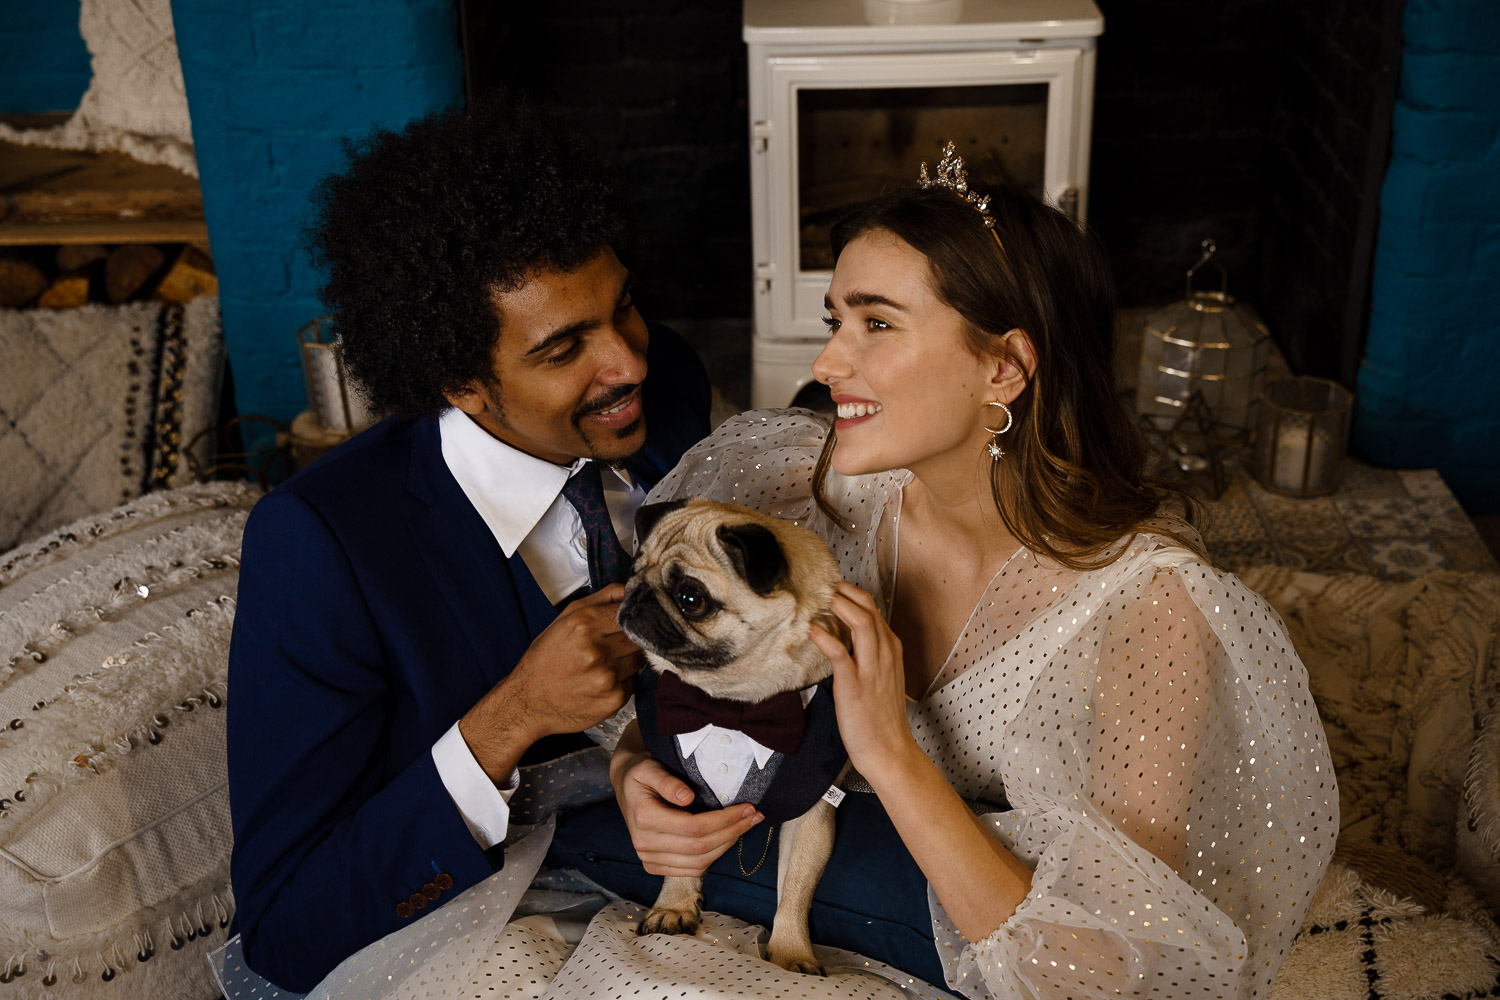 dog friendly wedding- dogs at weddings- katherine and her camera- dog wedding accessories-unconventional wedding- wedding planning advice- pets at weddings- wedding photos with dogs